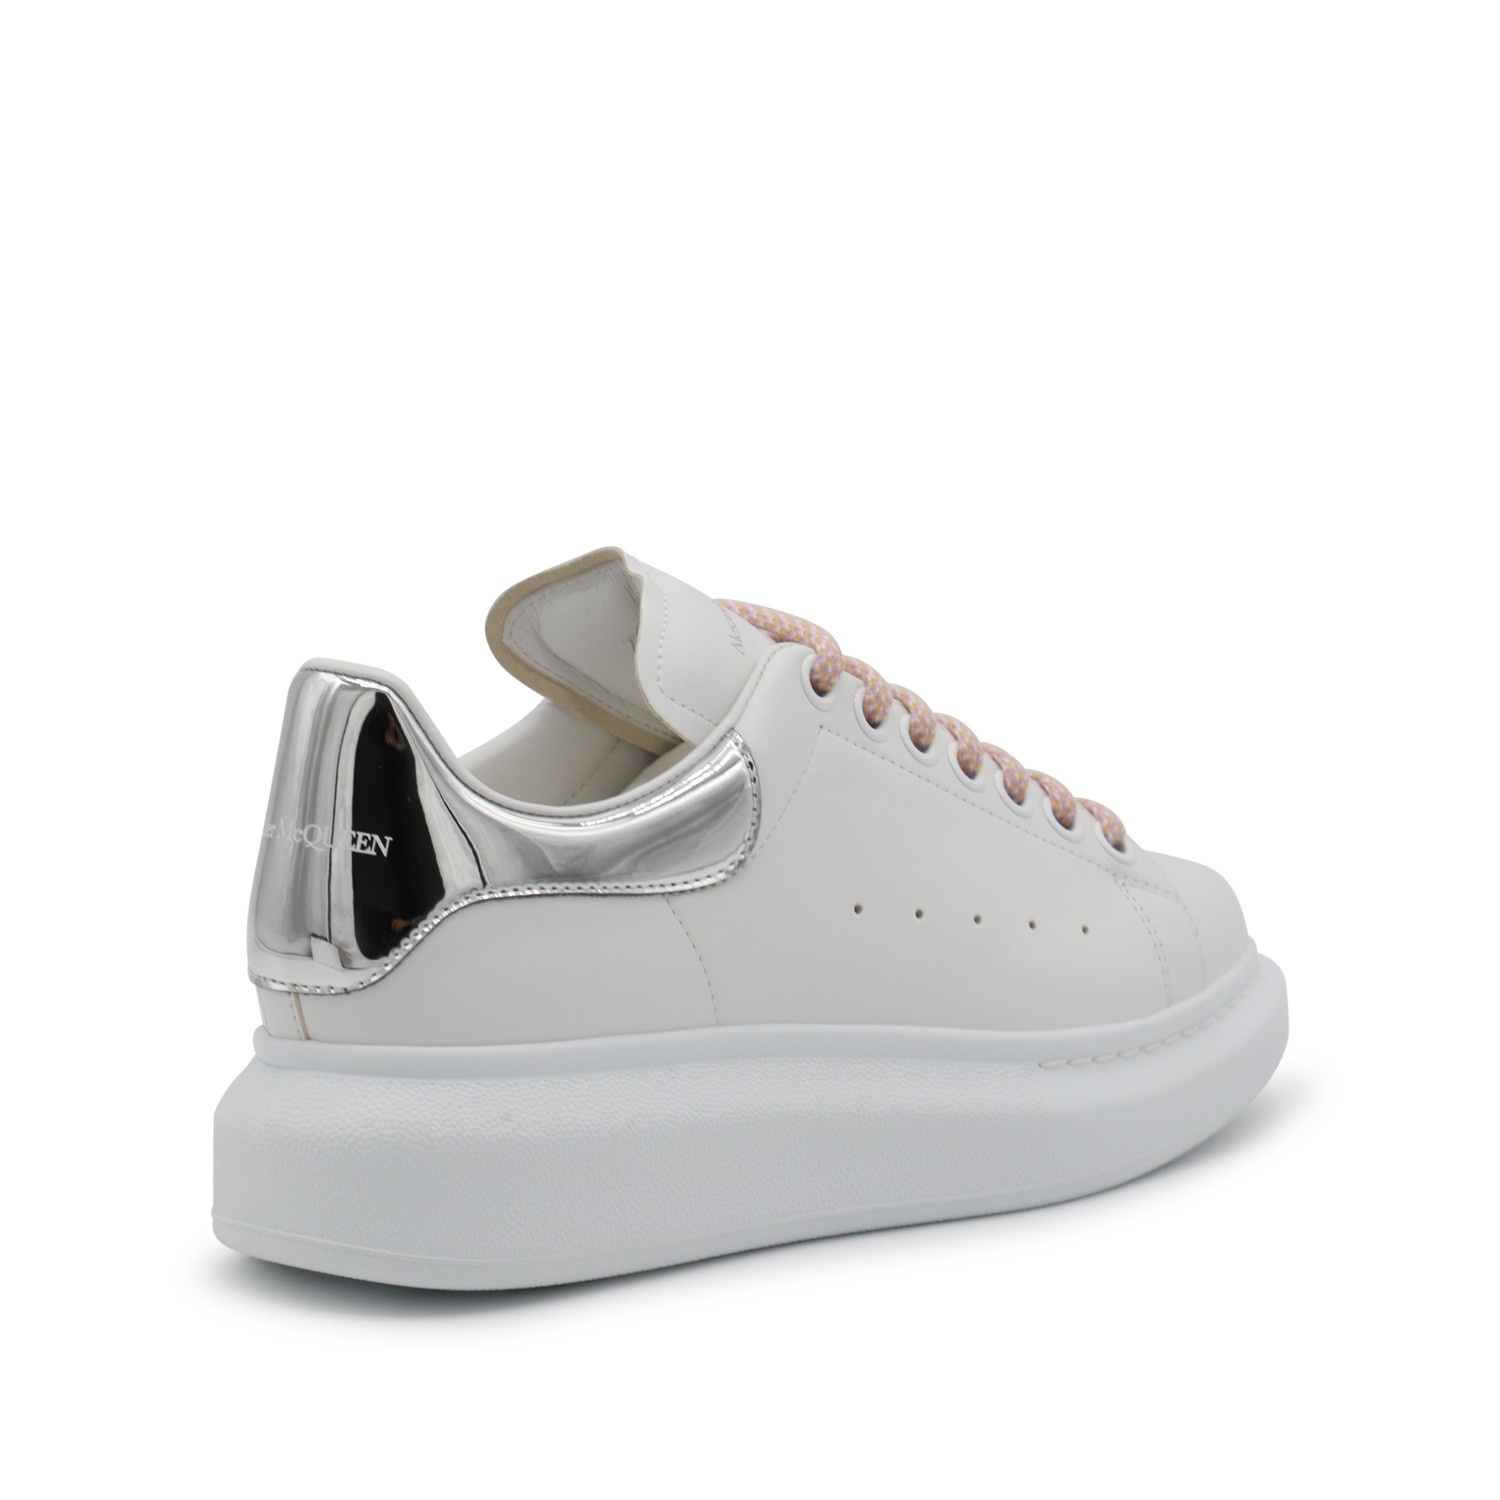 WHITE, PINK AND SILVER-TONE LEATHER OVERSIZED SNEAKERS - 3